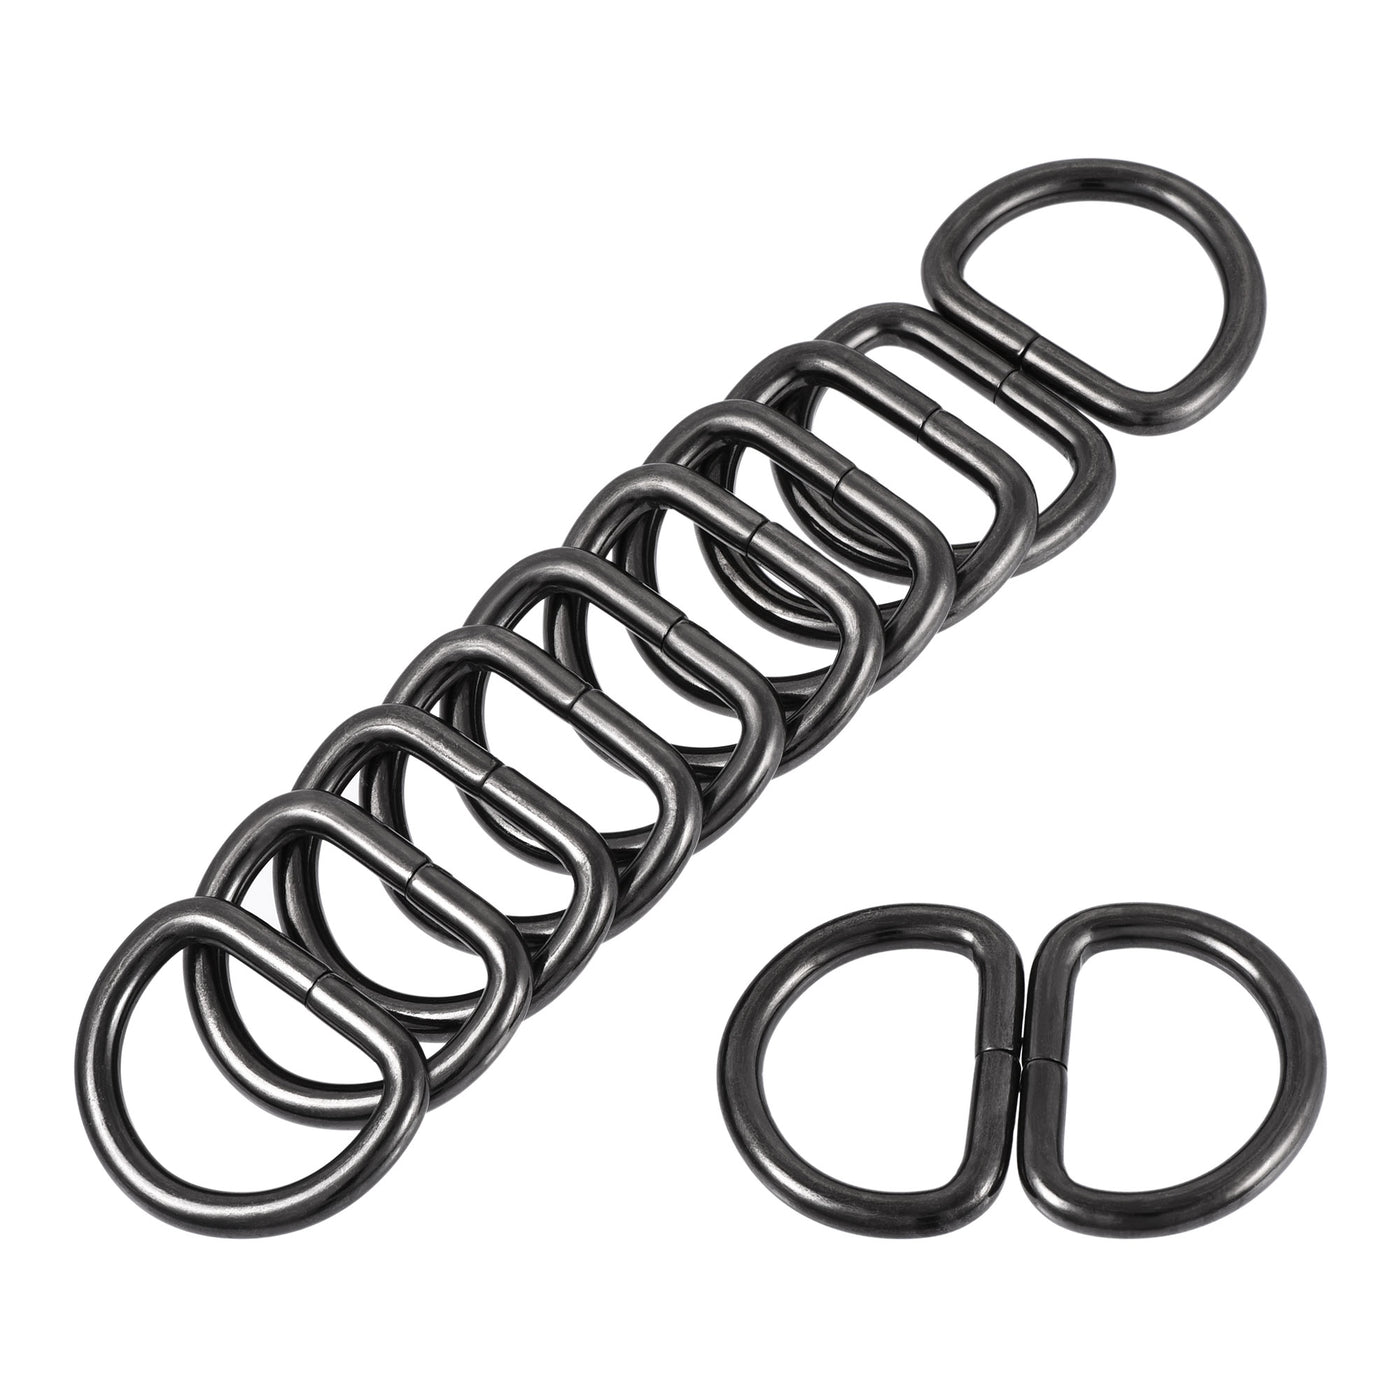 uxcell Uxcell Metal D Ring 0.98"(25mm) D-Rings Buckle for Hardware Bags Belts Craft DIY Accessories Black 50pcs